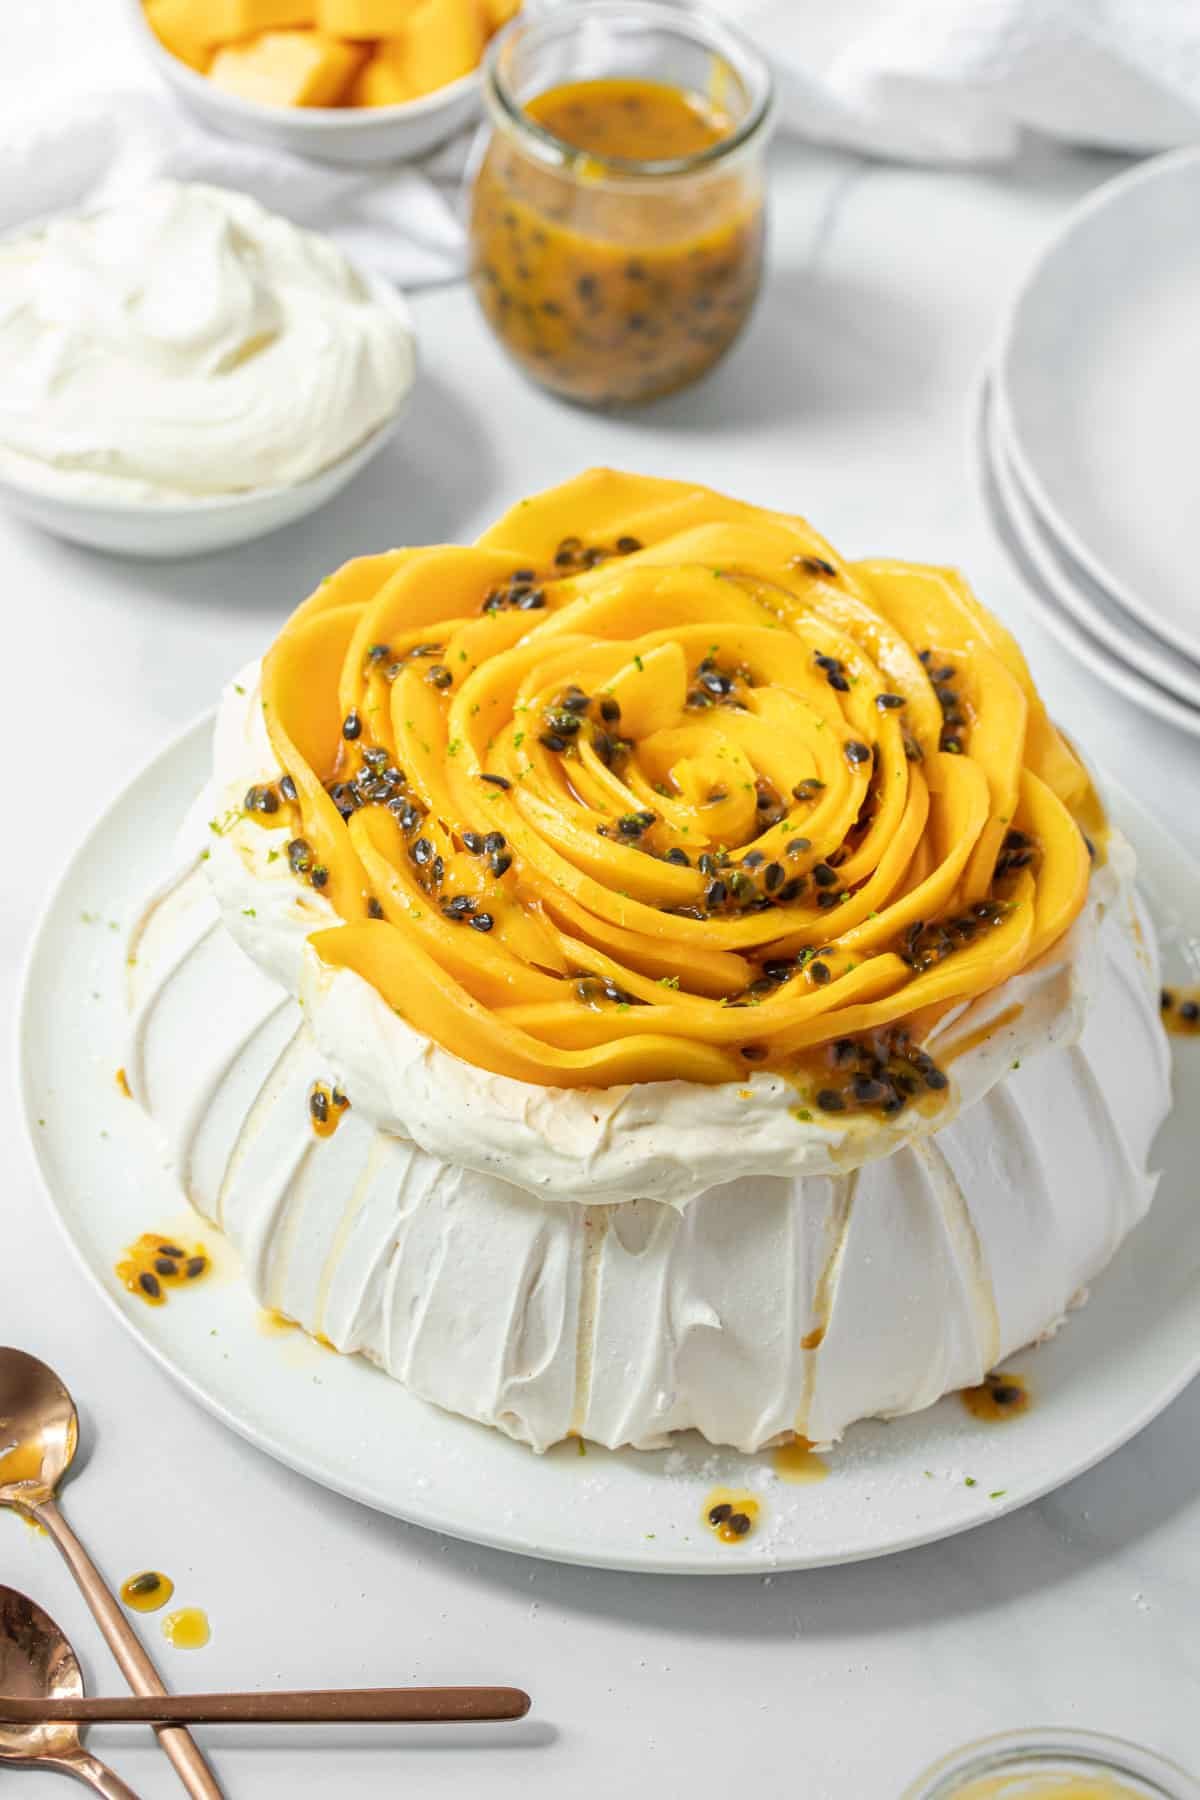 pavlova on a plate, topped with slices of mango and passion fruit.